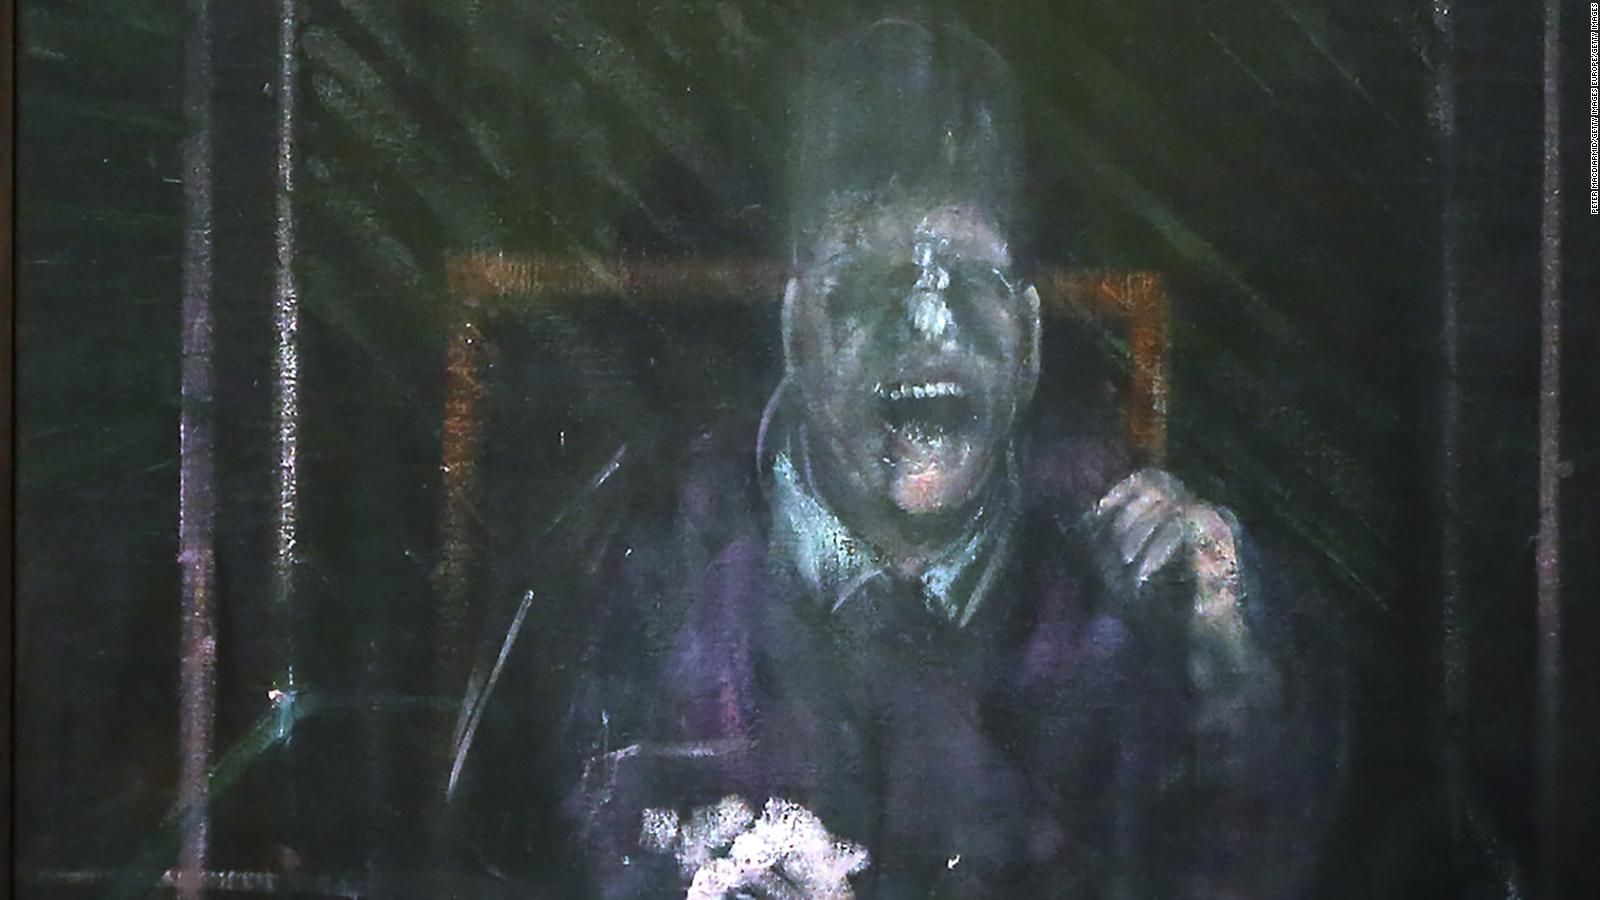 Francis Bacon's portraits of screaming popes and lovers live